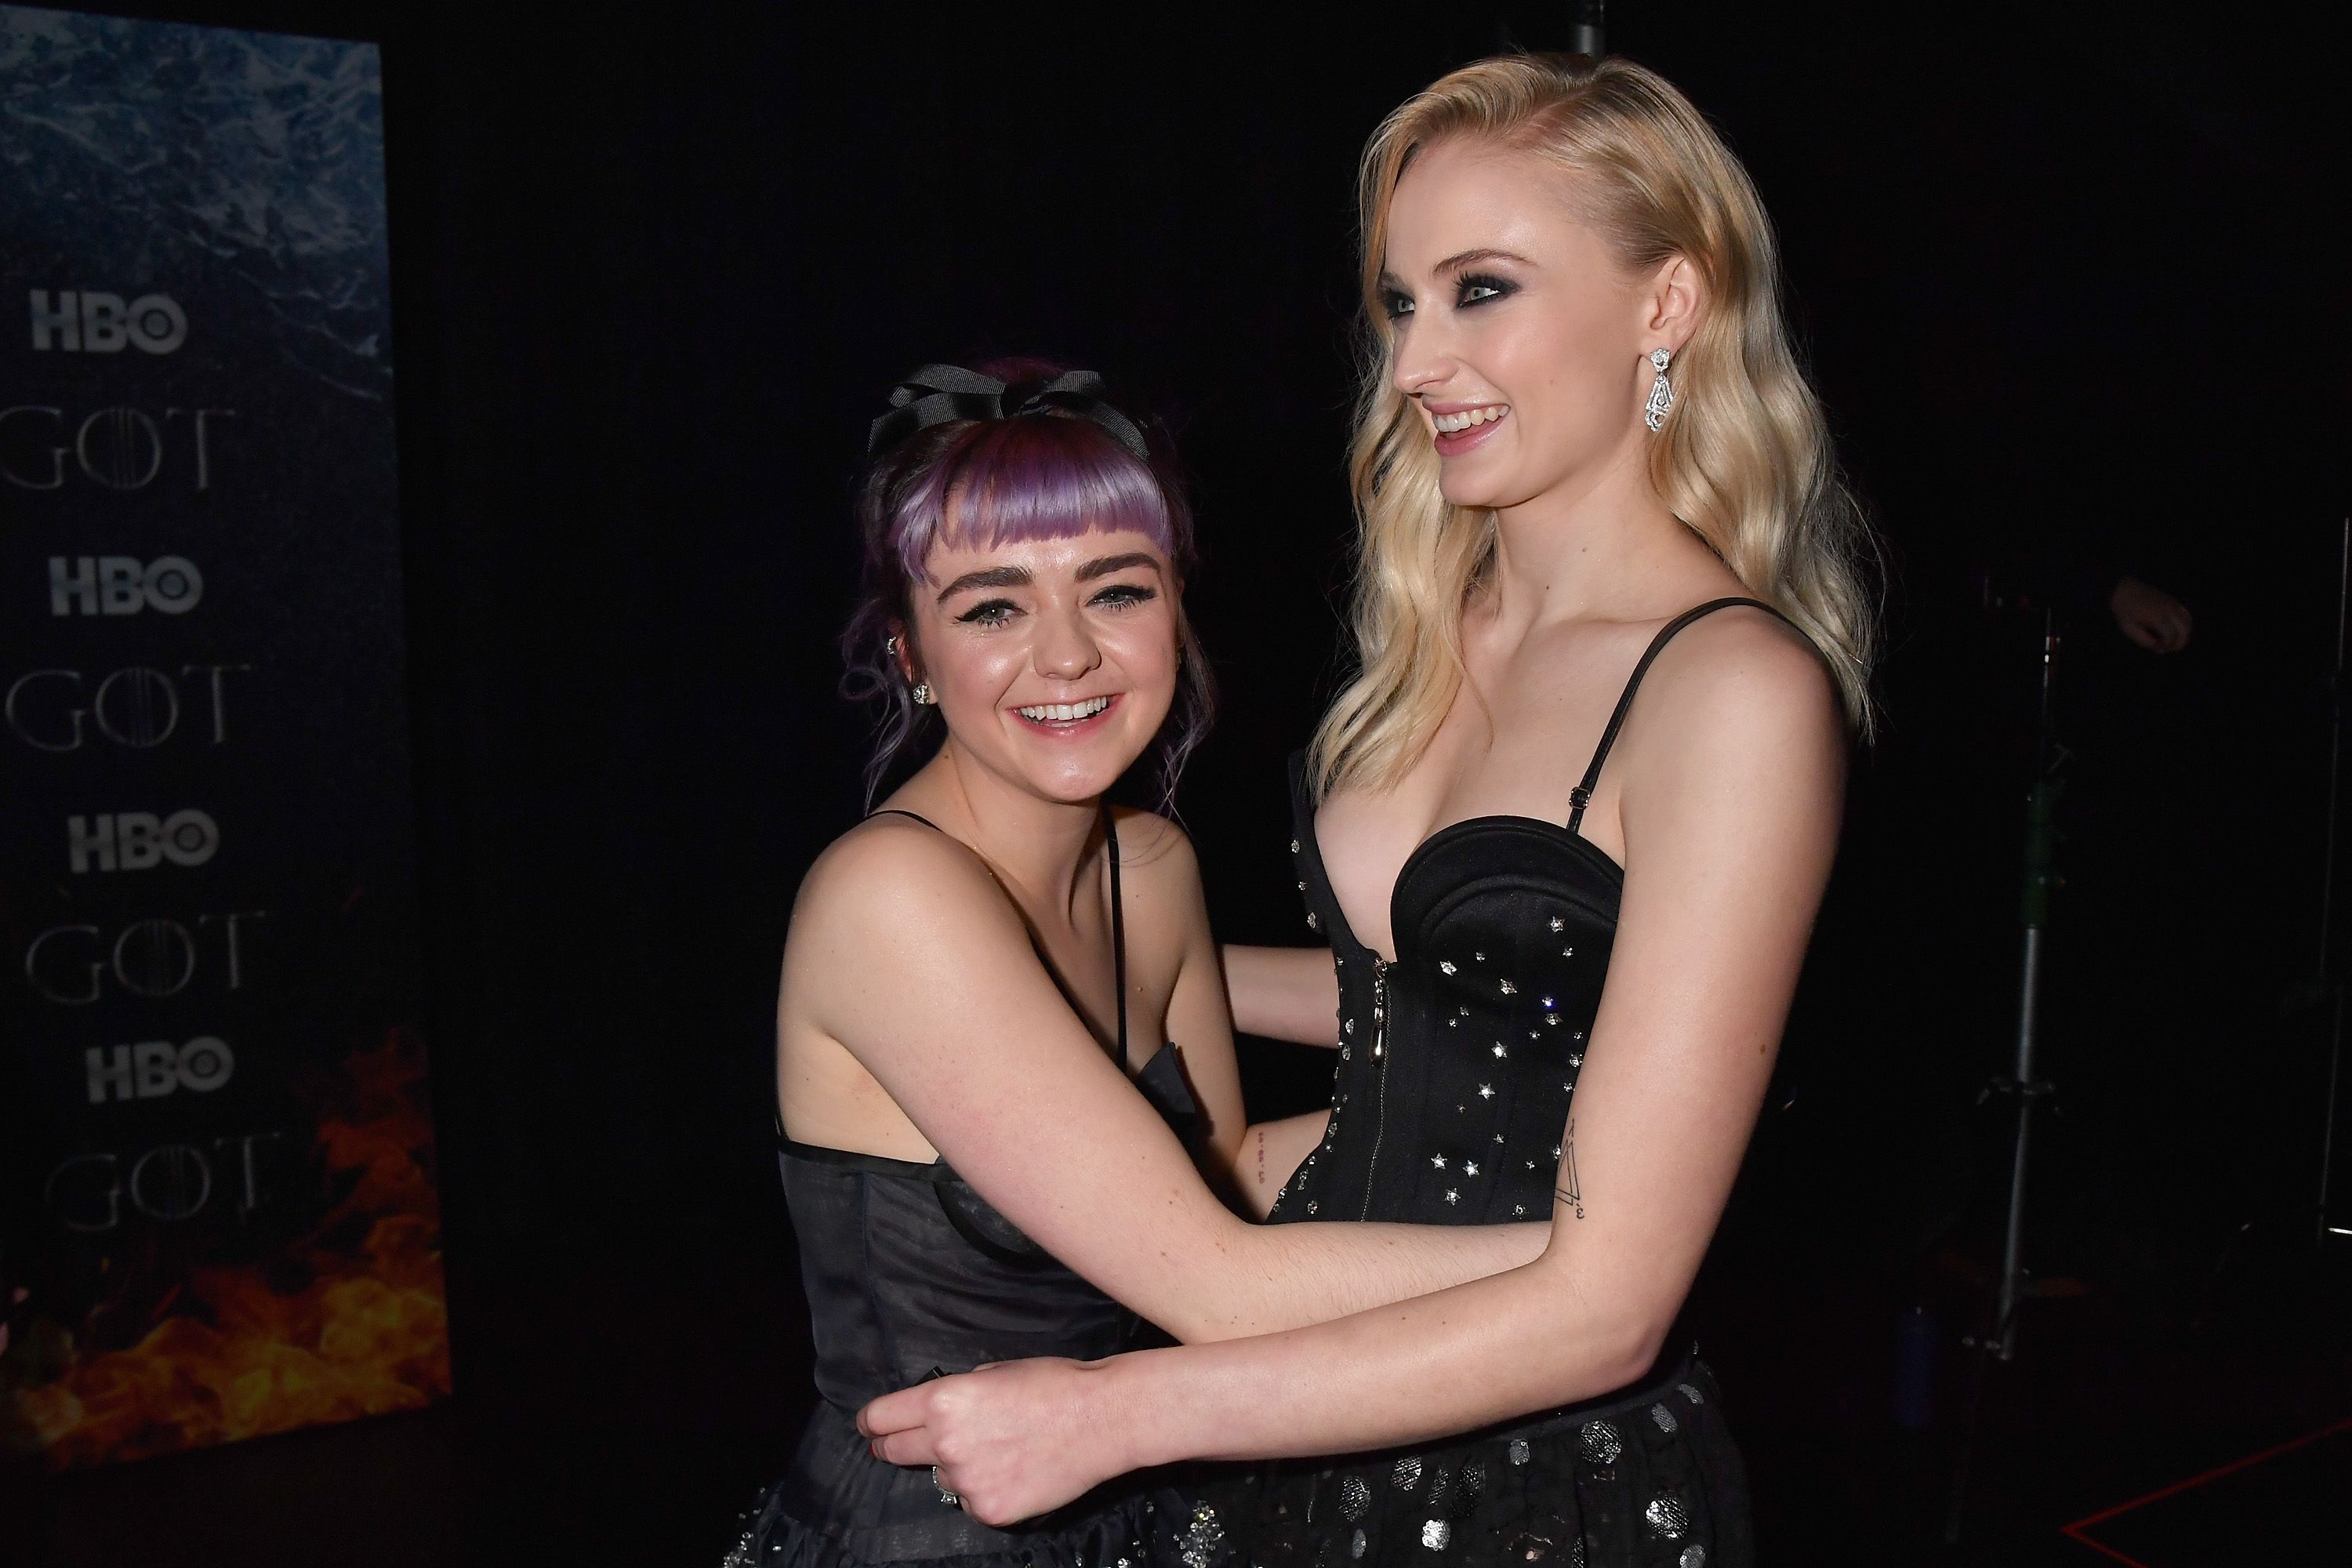 abby clouse recommends Sophie Turner Nude Scene